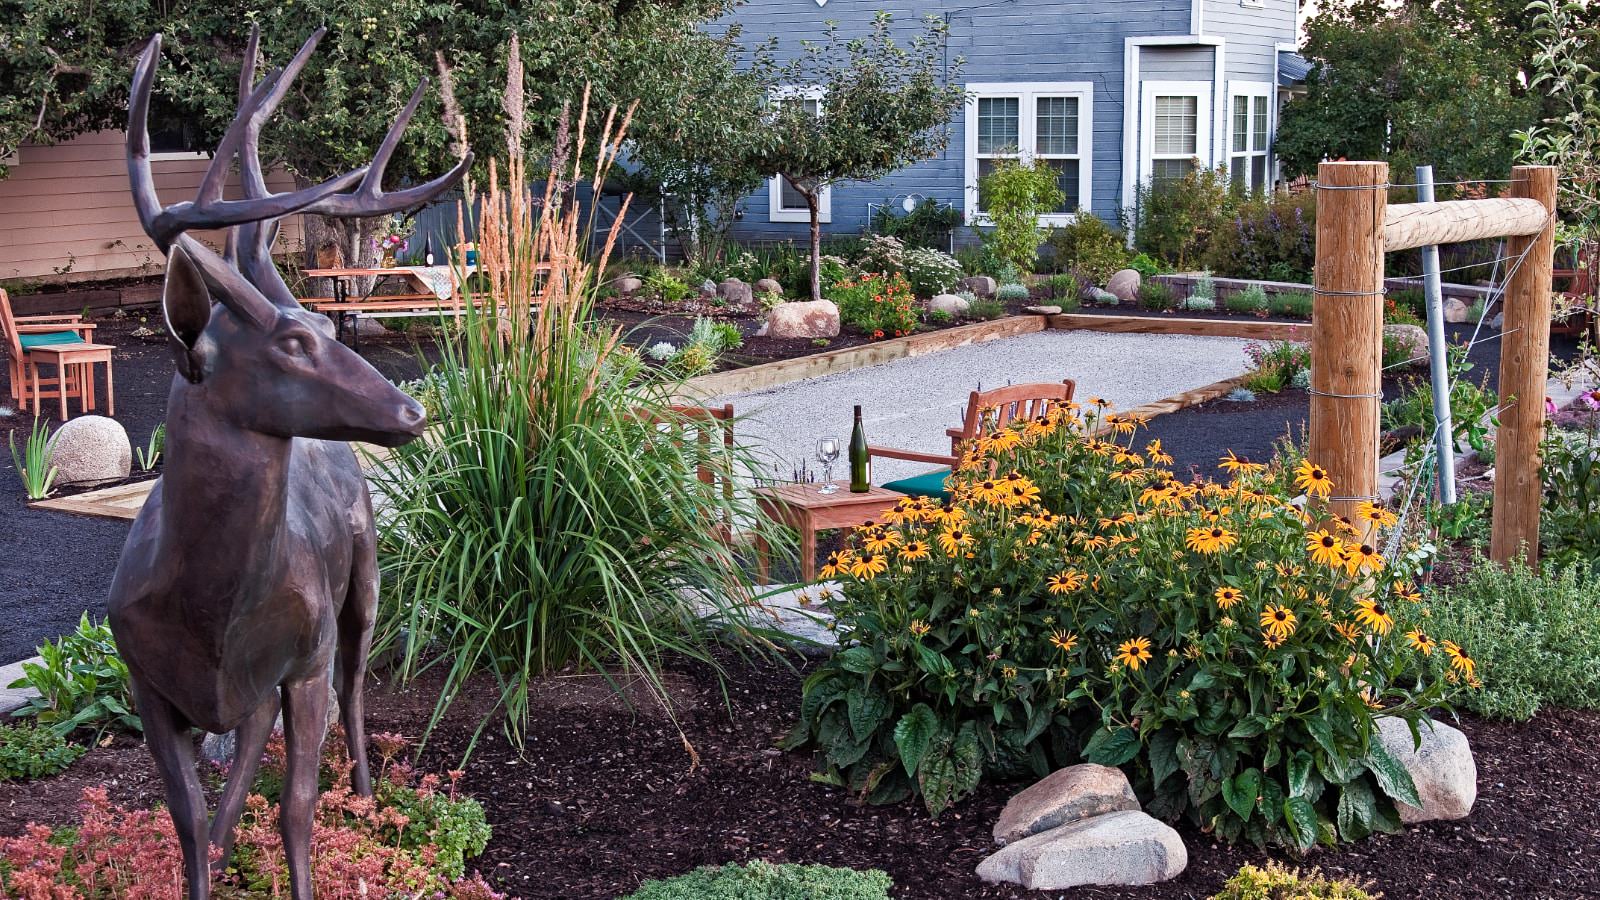 Large bronze sculpture of deer with antlers in a garden with bocce court surrounded by flowers, bushes, and trees